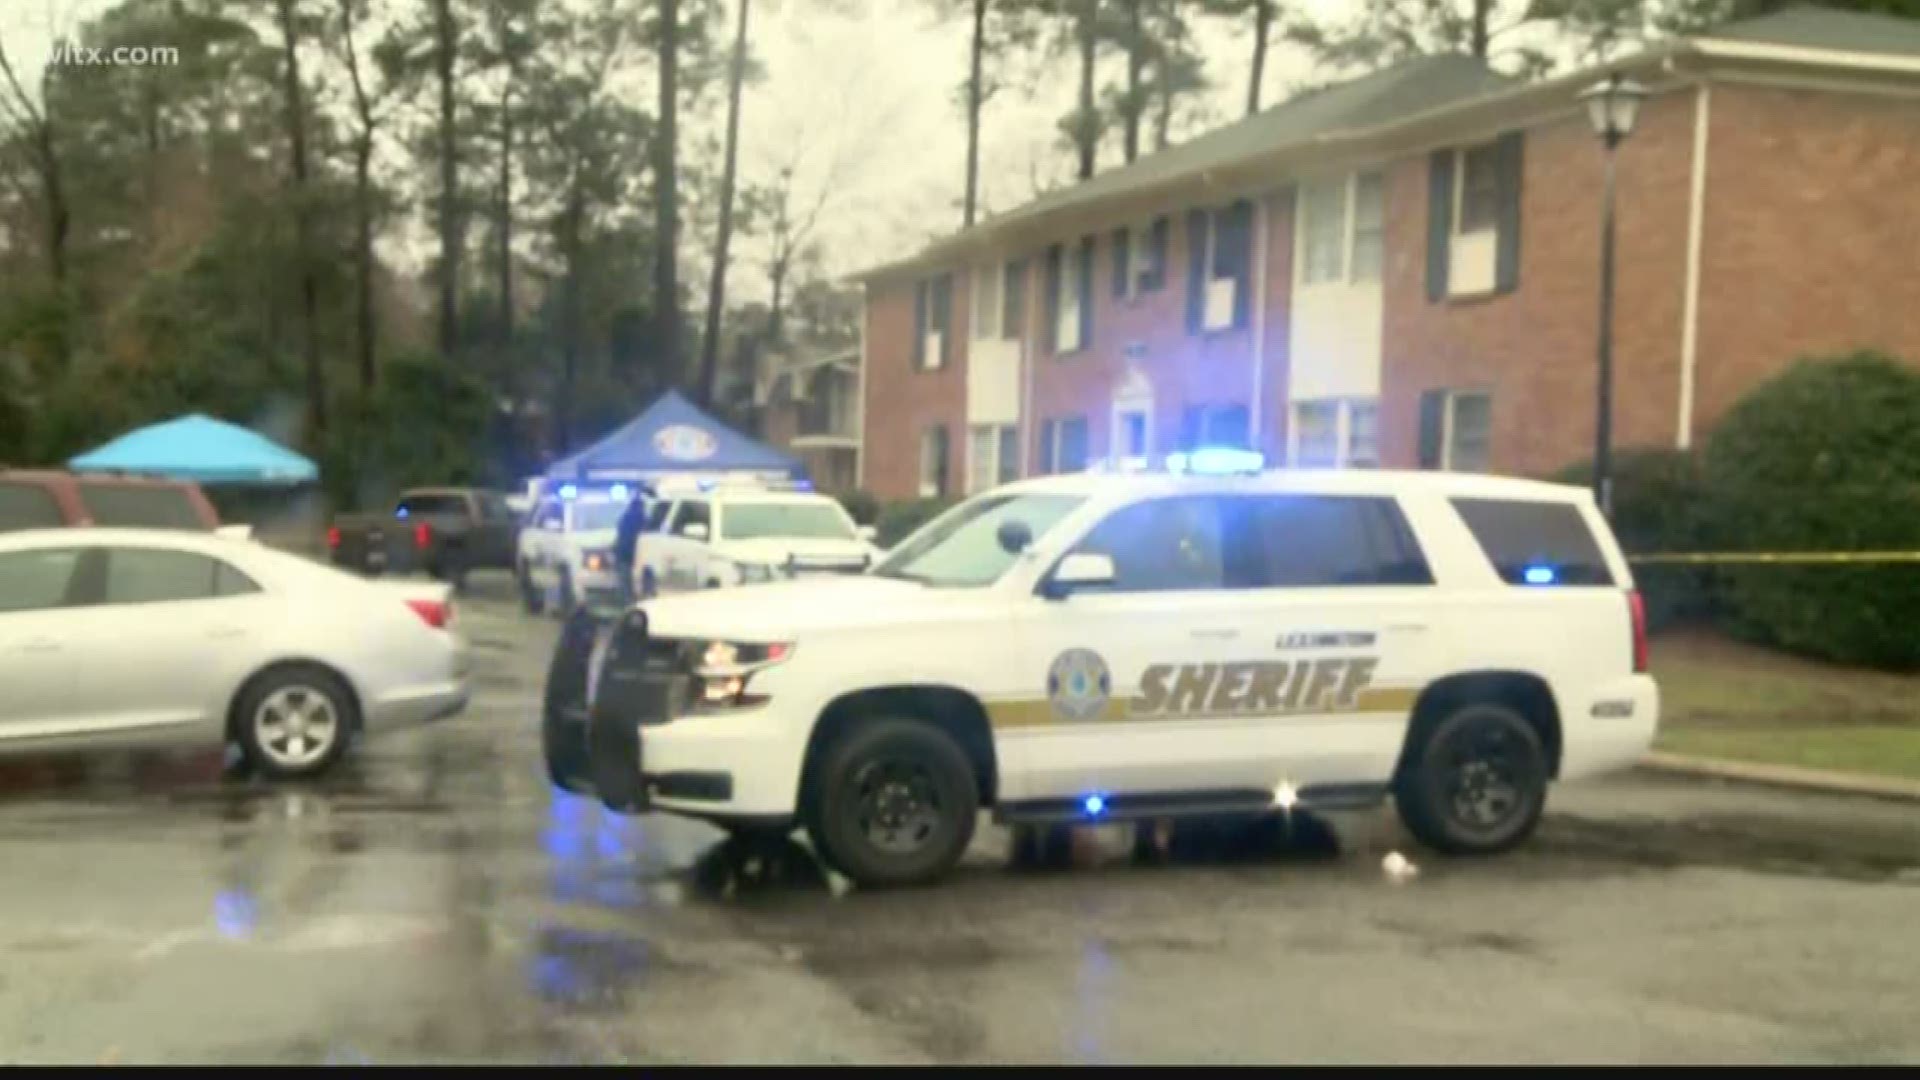 The shooting happened at the Woodland Village apartments on Butternut Lane